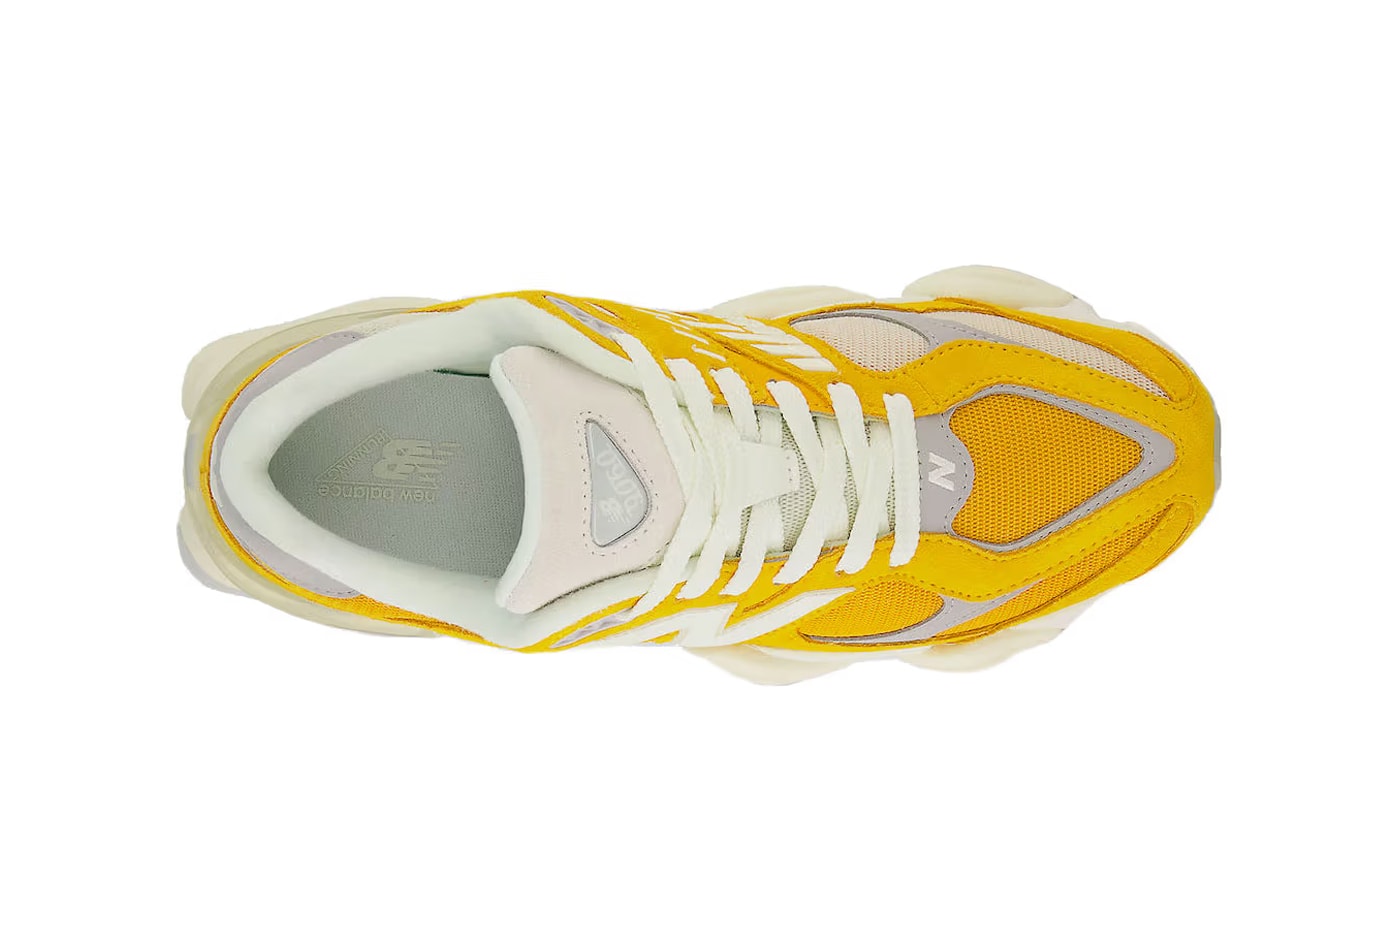 New Balance 9060 Yellow Suede Release Info